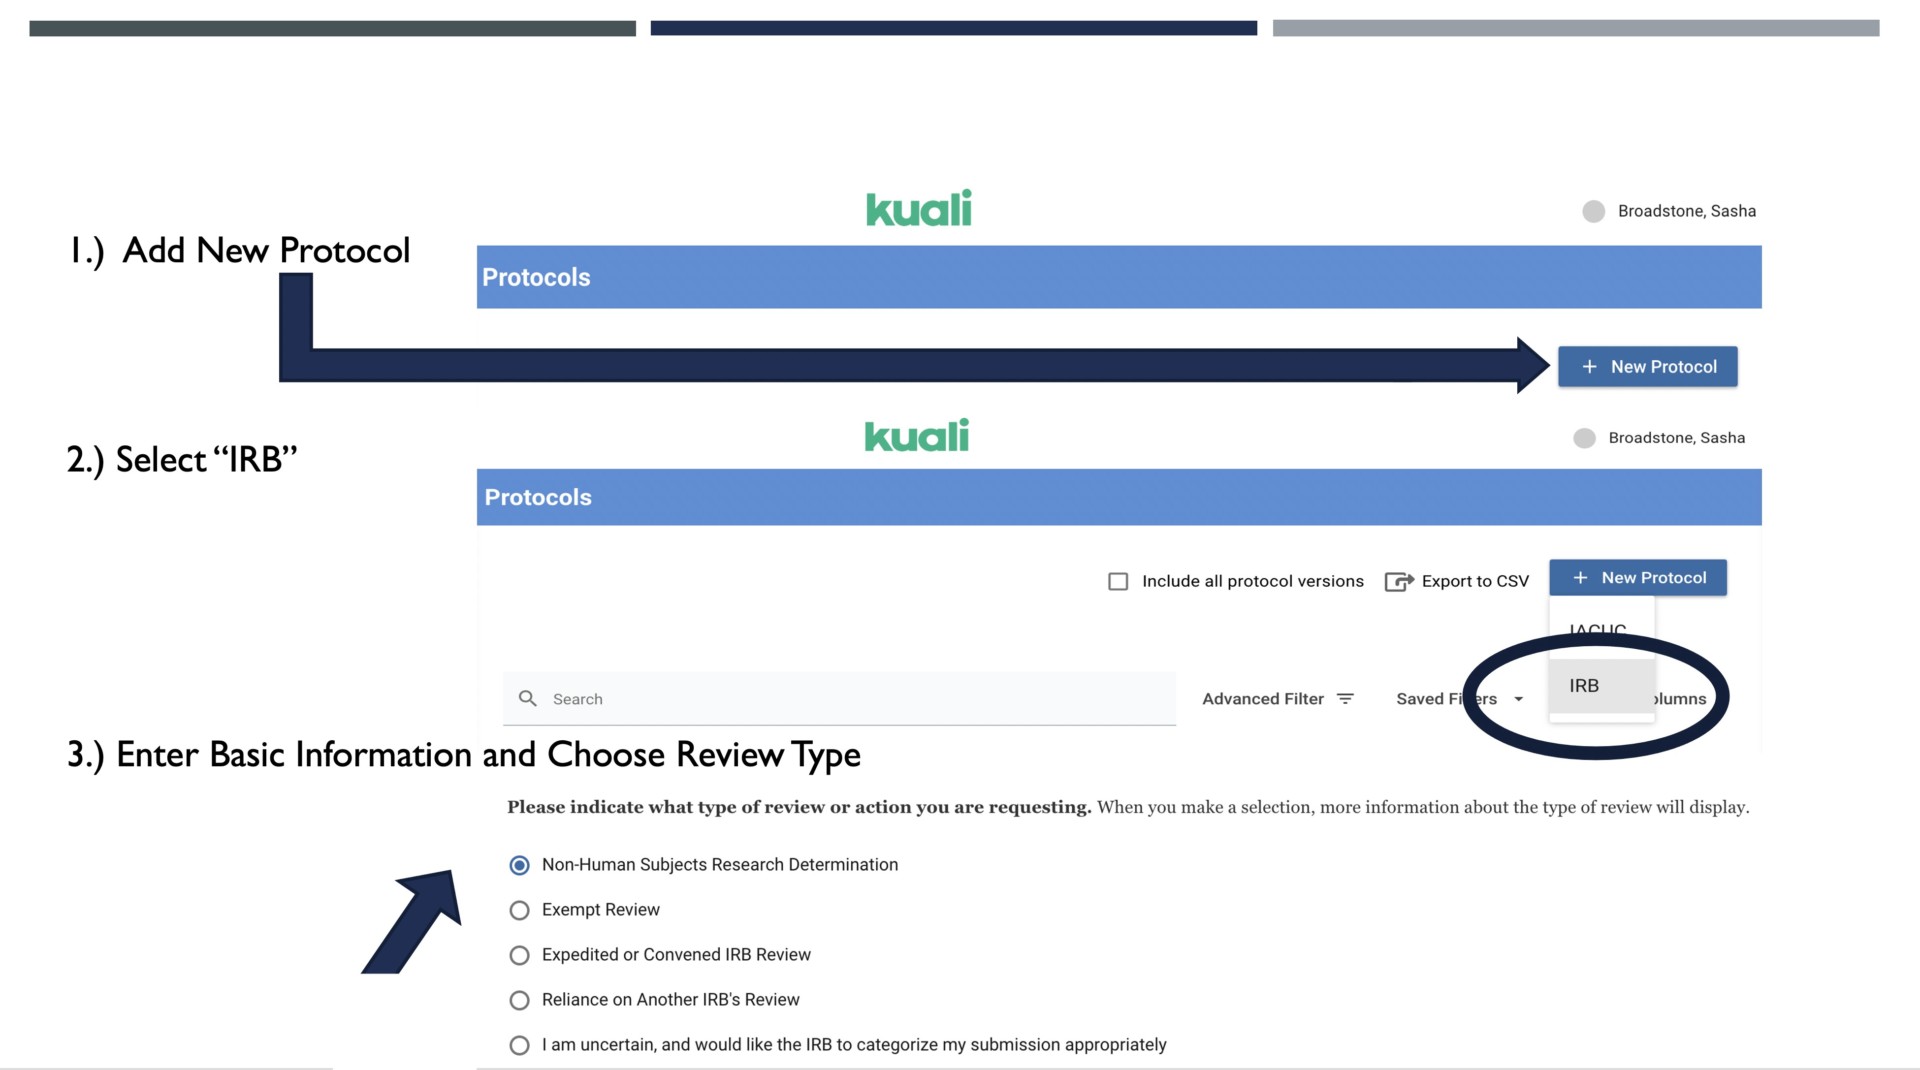 Demo on how to file nhsr form in kuali